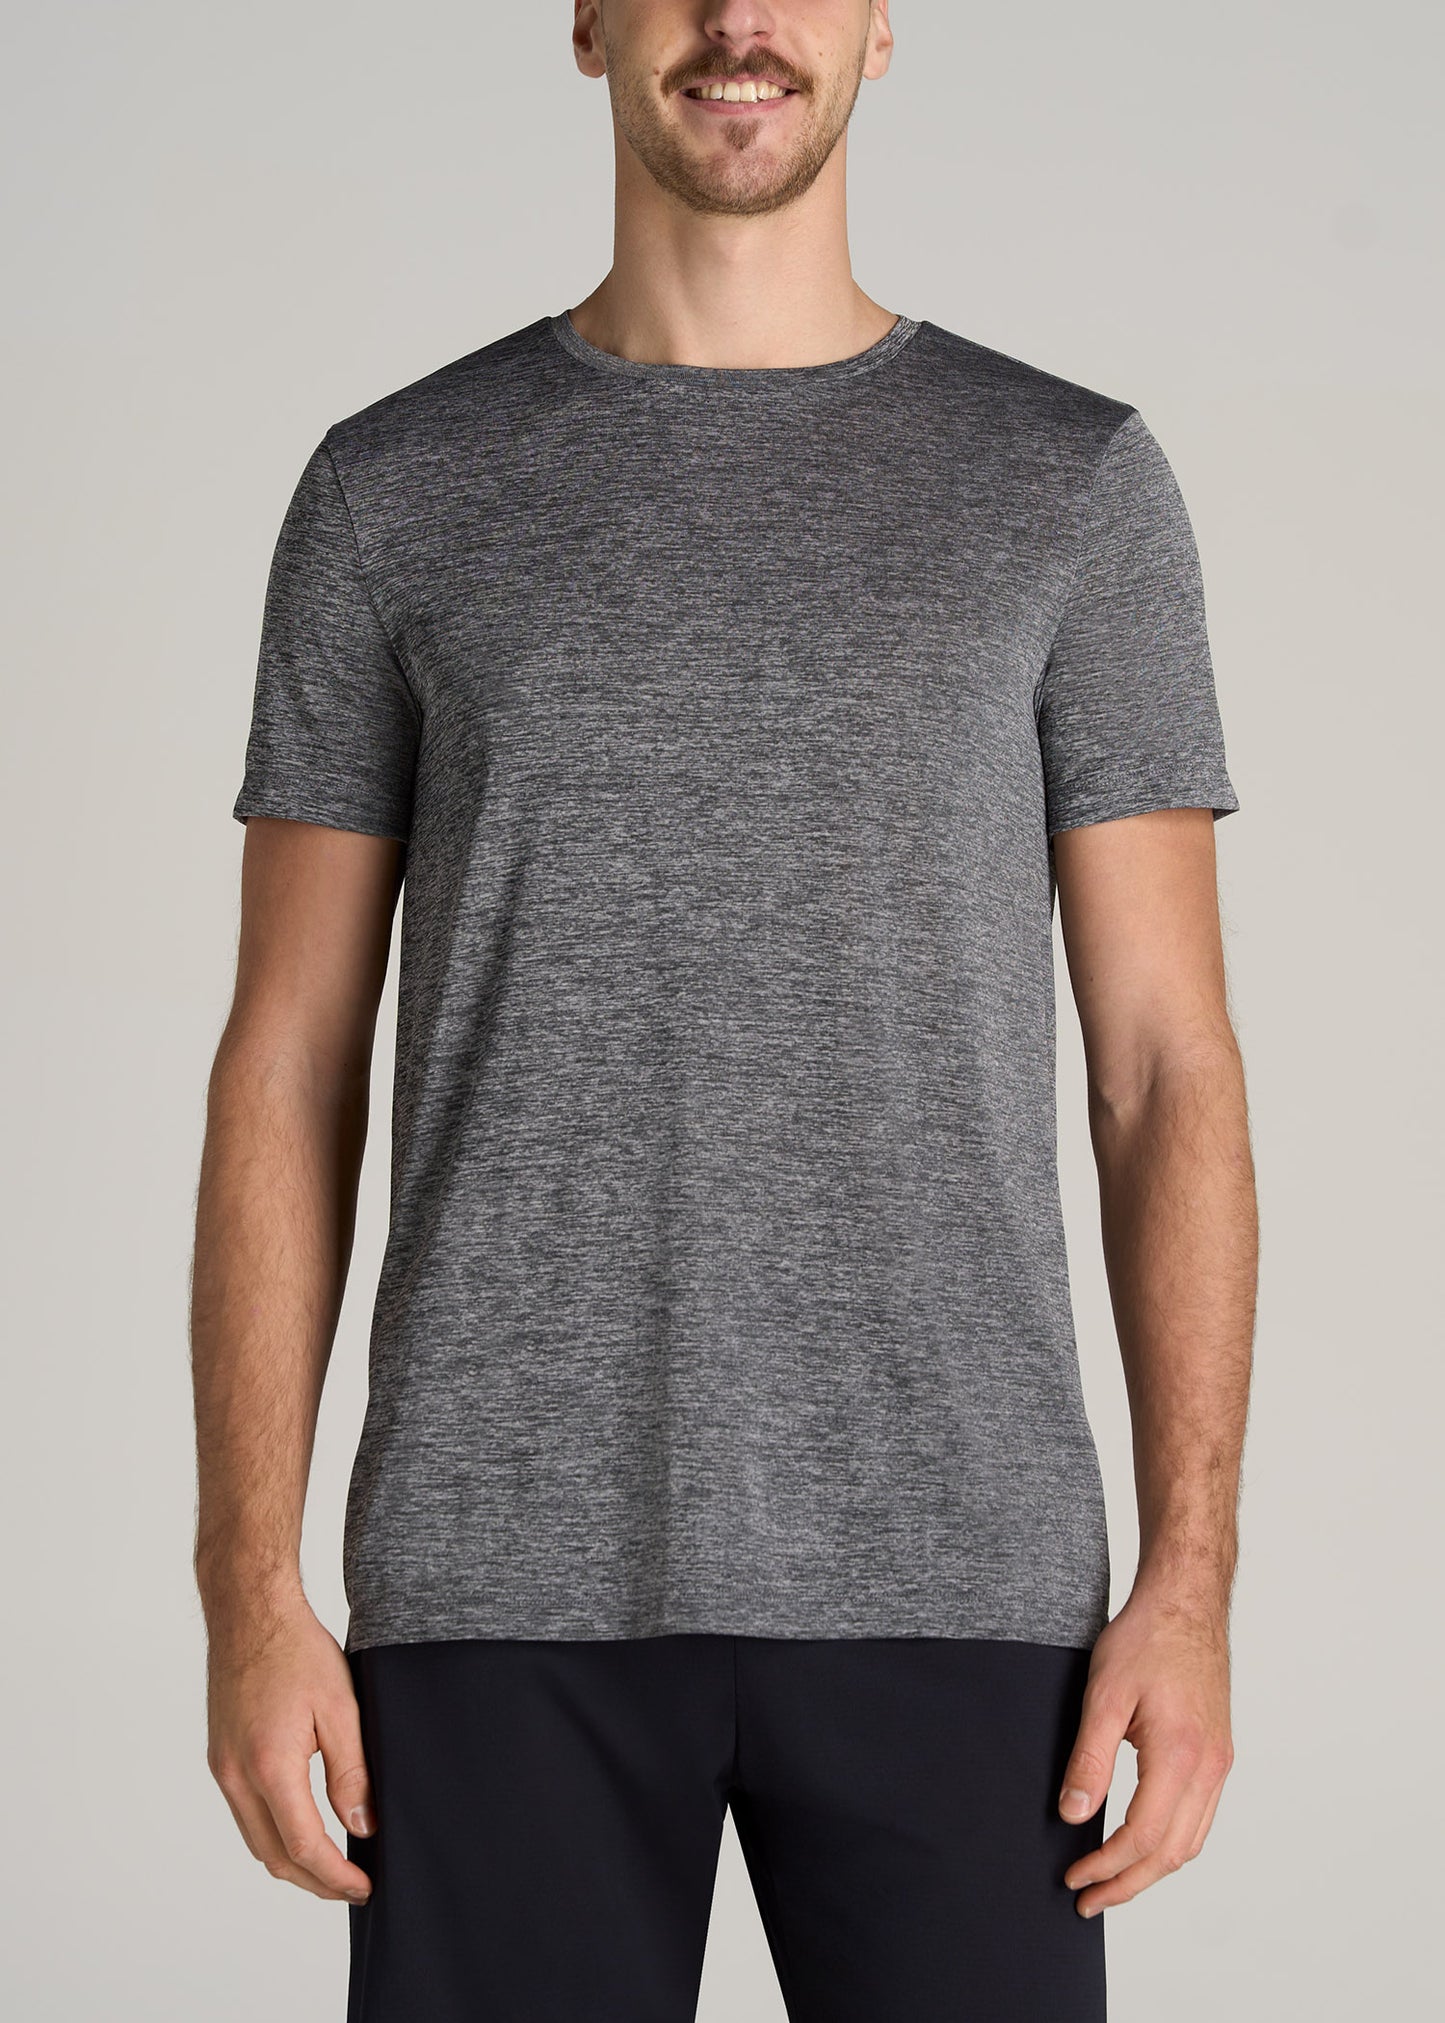     American-Tall-Men-Performance-MODERN-FIT-Athletic-Jersey-Tee-Grey-Mix-front